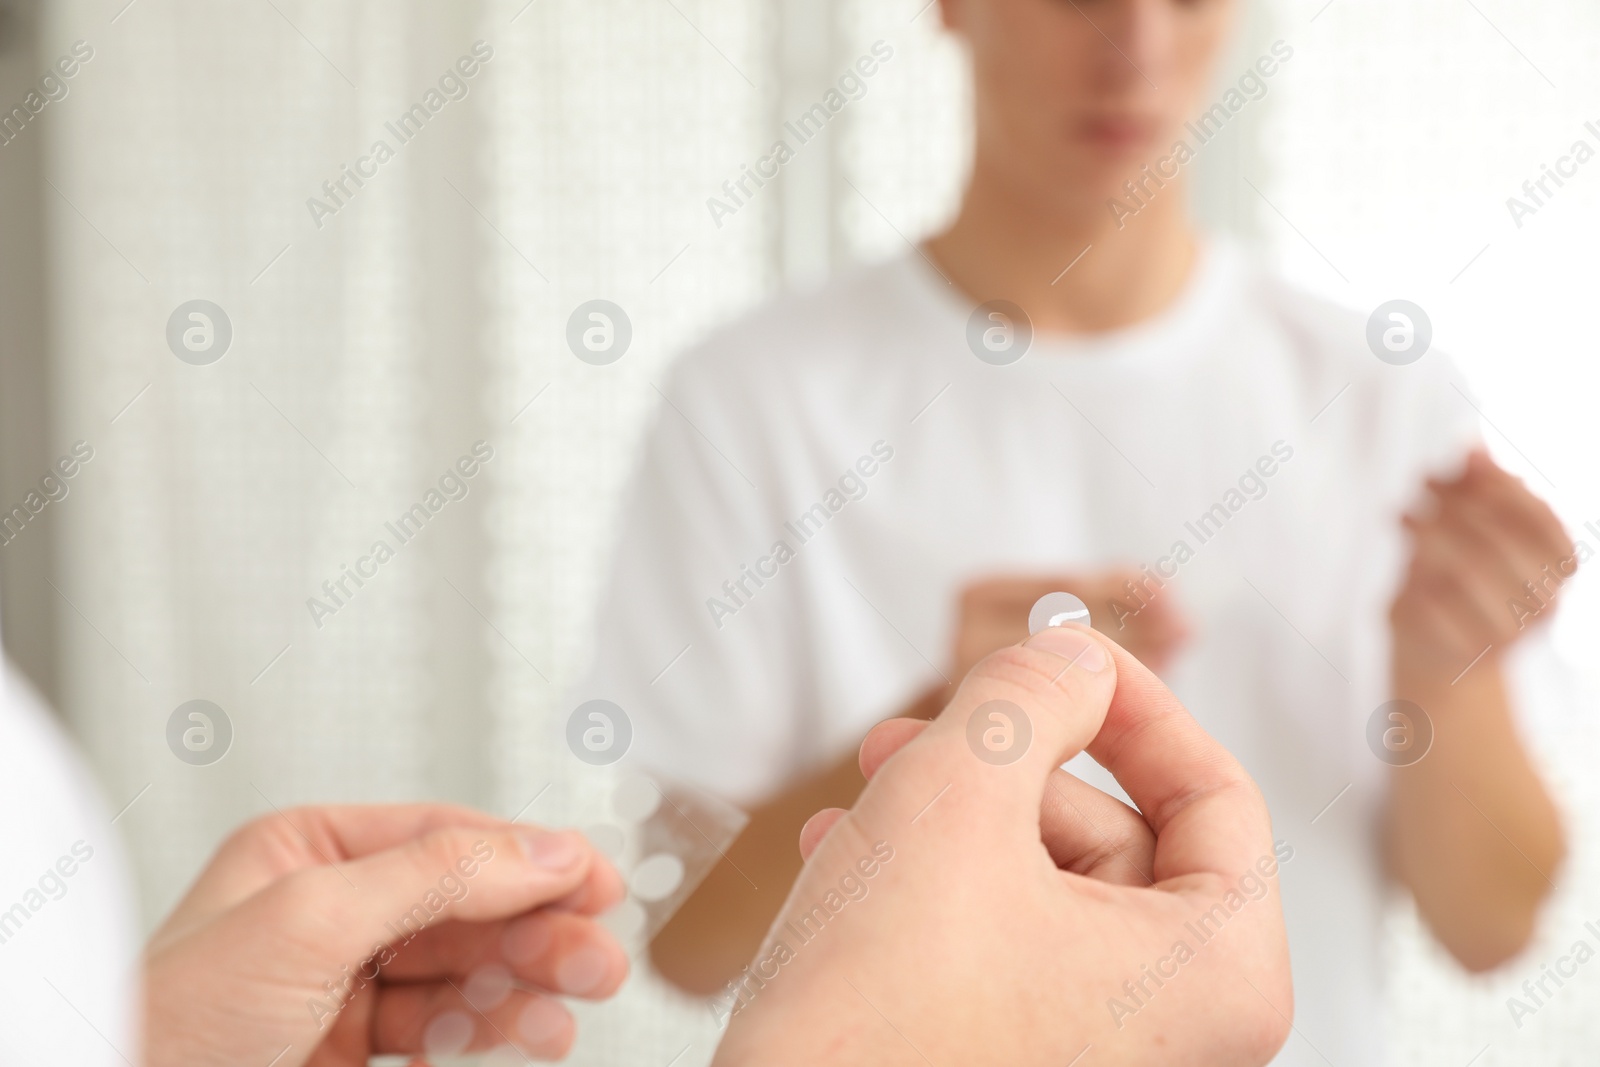 Photo of Teen guy using acne healing patch near mirror indoors, focus on hands